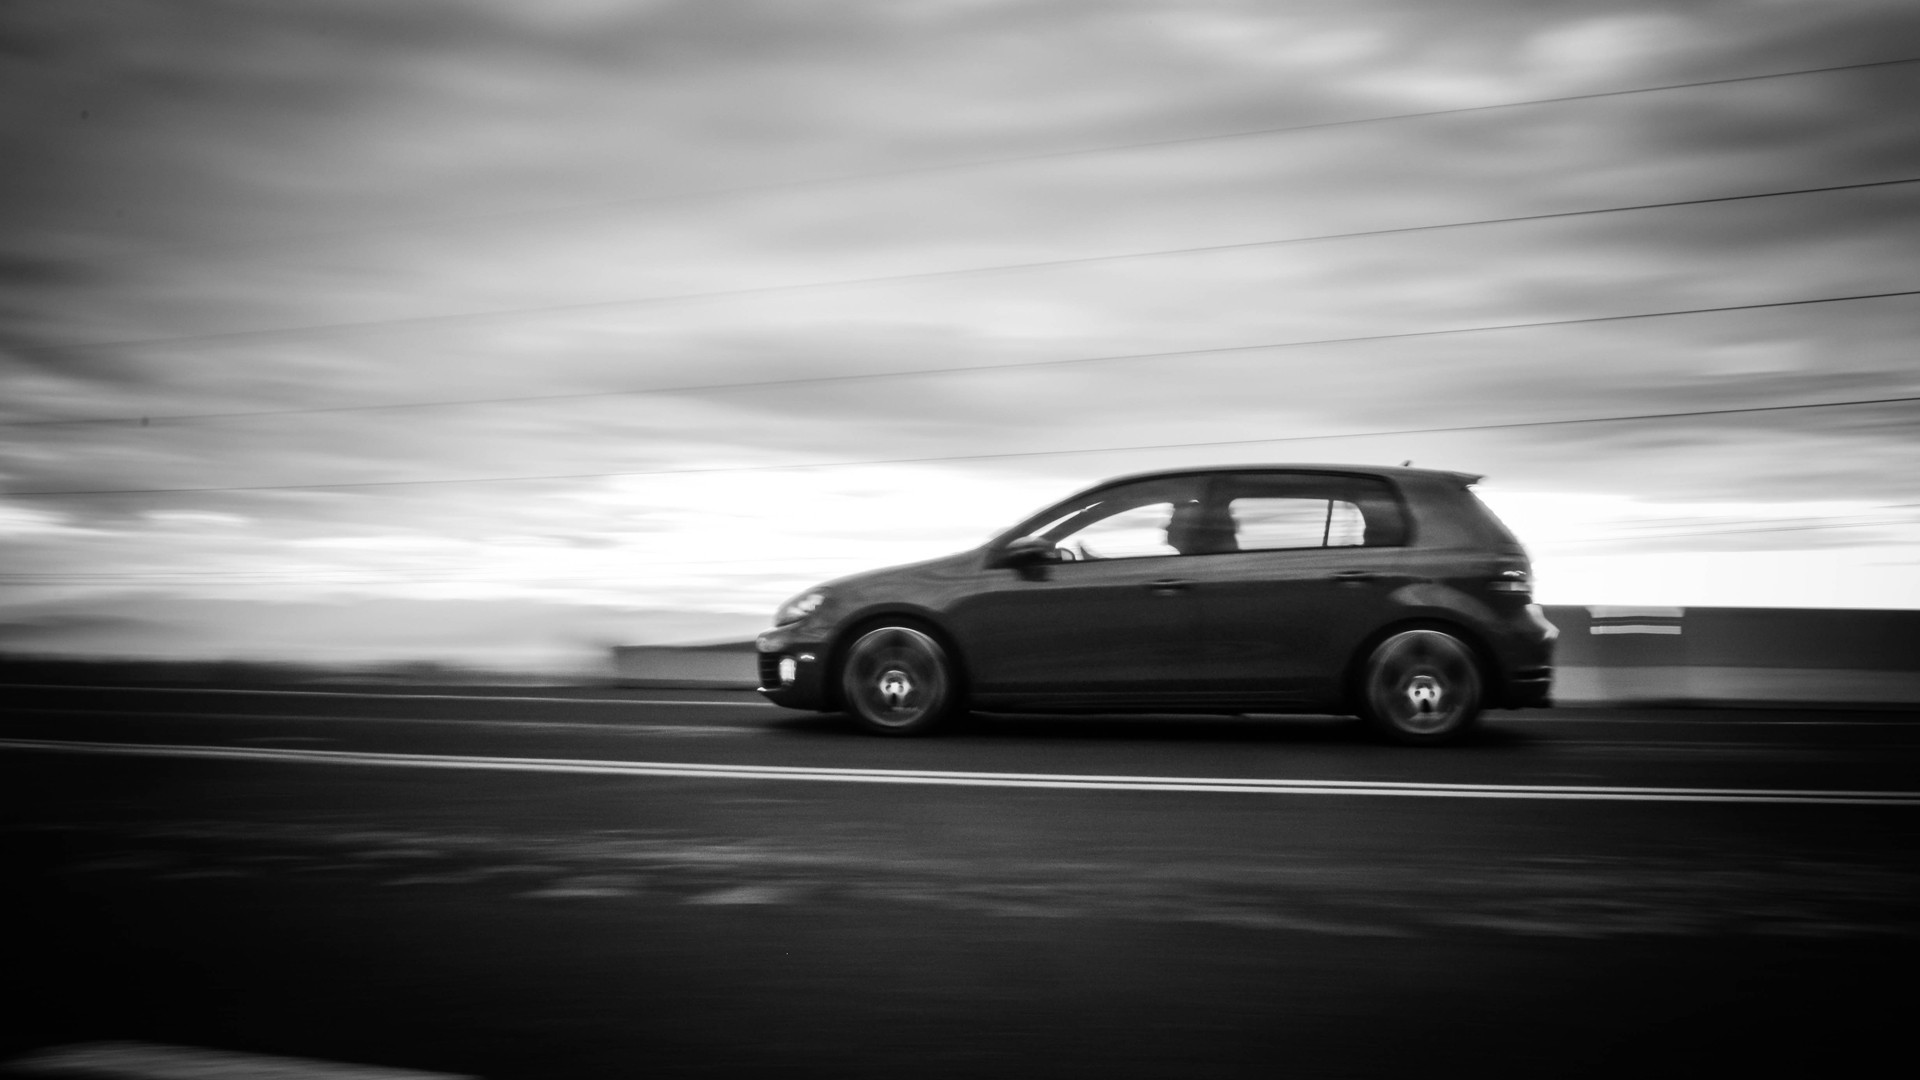 1920x1080 Some more hi-res wallpaper goodness. Rolling BW shot of a MKVI GTI. [ ] ...